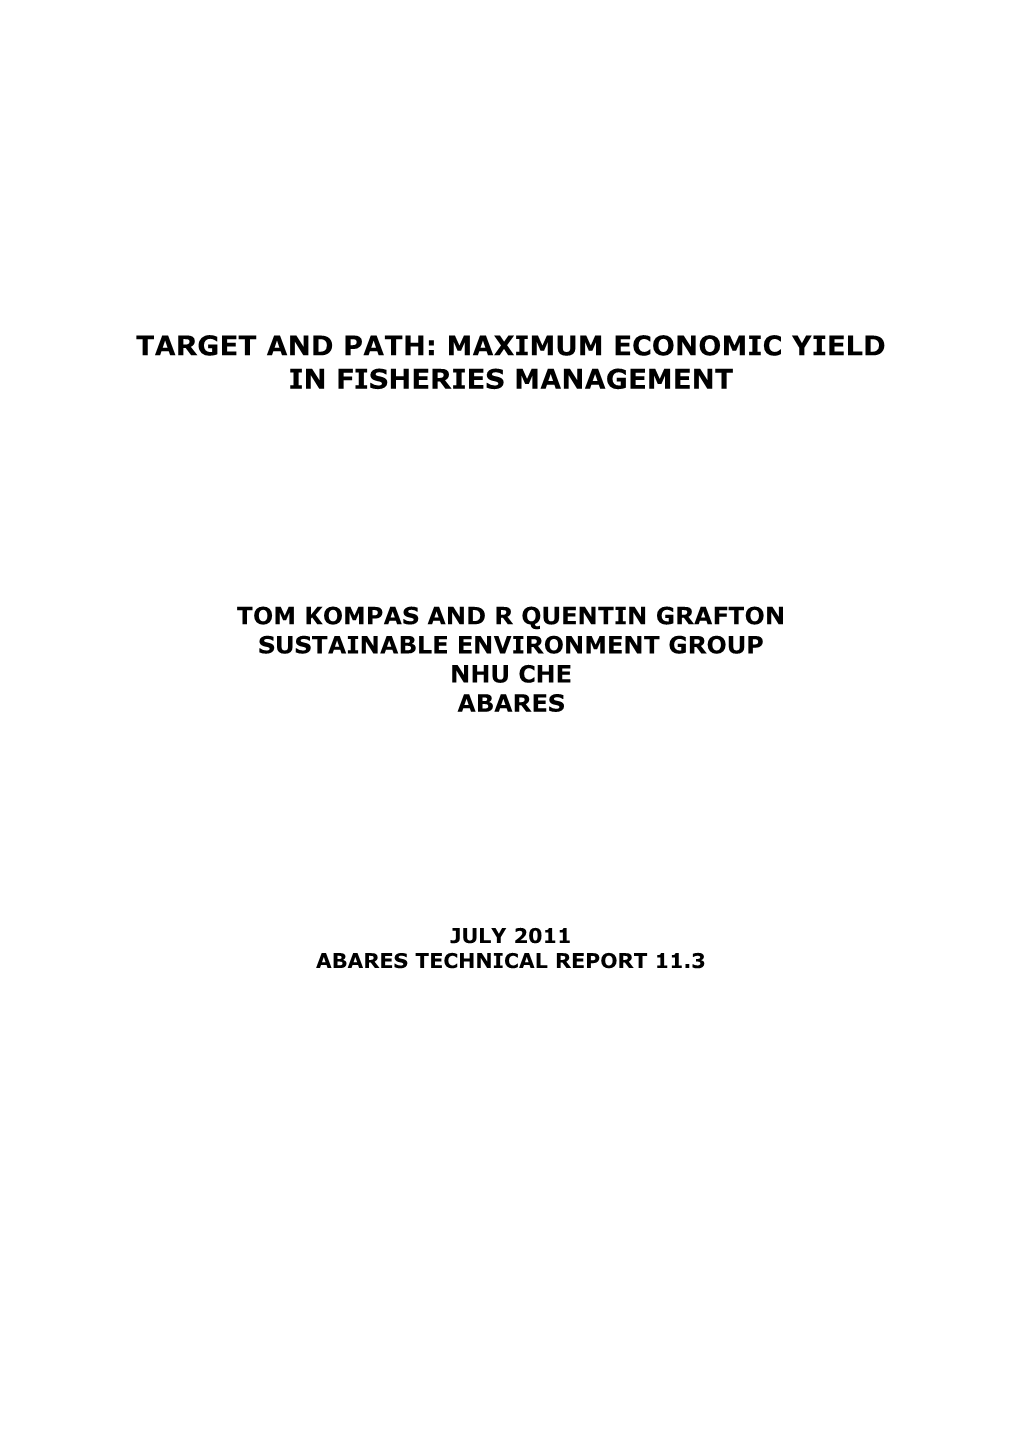 Target and Path: Maximum Economic Yield in Fisheries Management